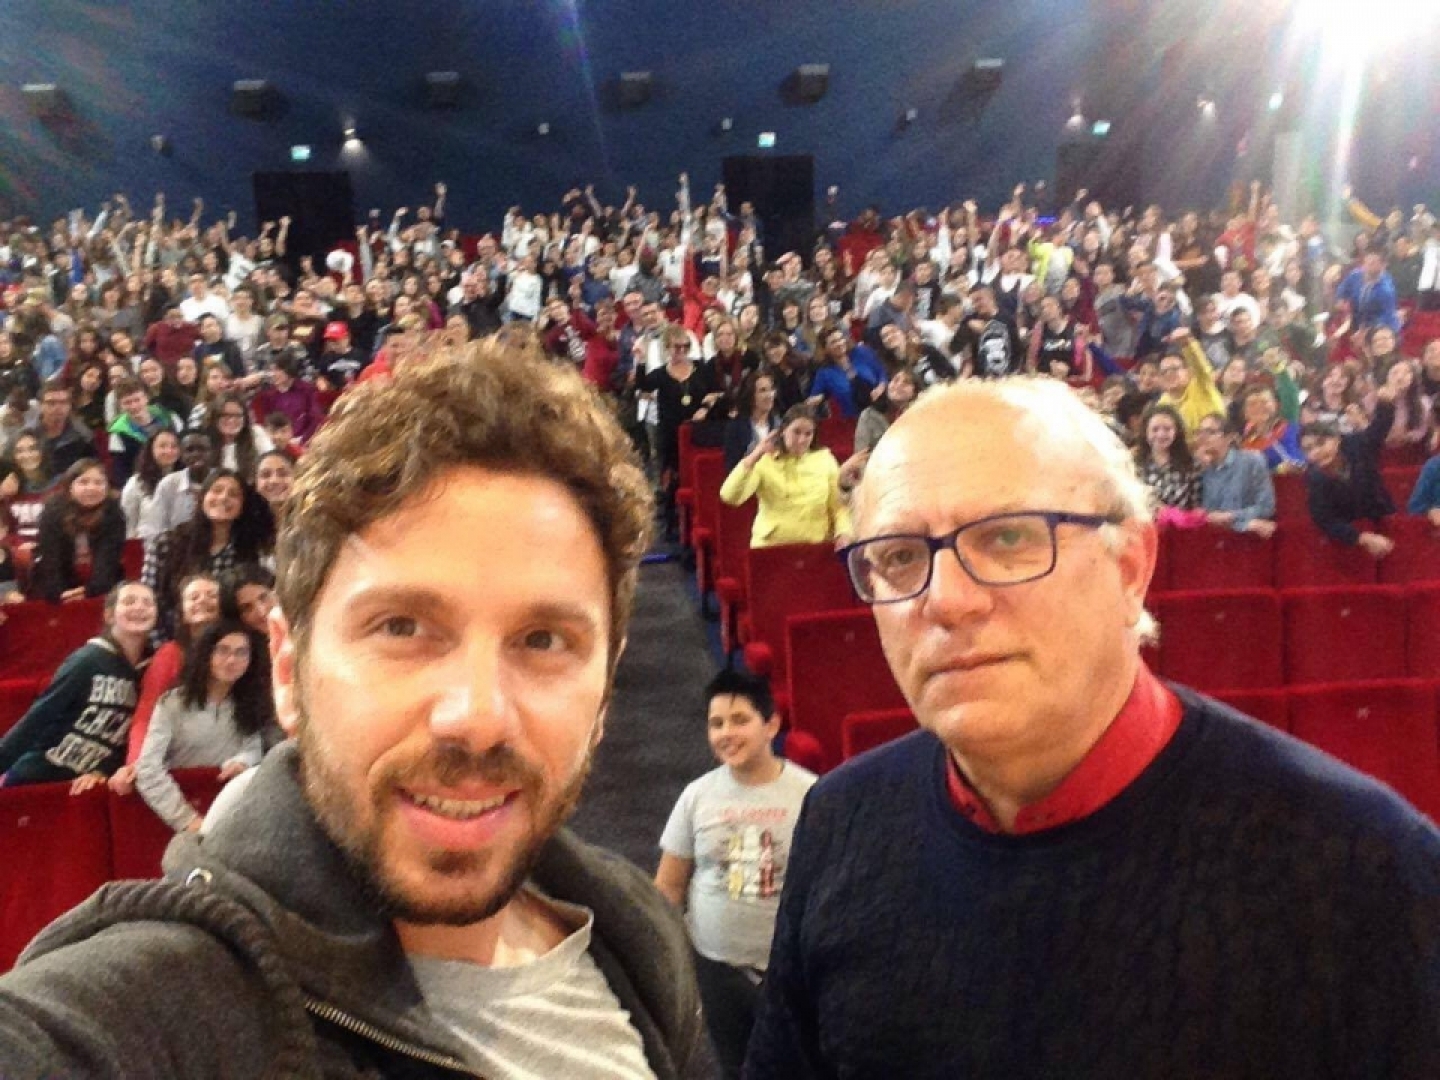 ”IDEAS, AMBITIONS AND CURIOSITY WITH WHICH YOU ENRICH YOUR DREAMS COUNT”: DIRECTOR GUBITOSI TALKS TO STUDENTS AT THE MOVIE DAYS